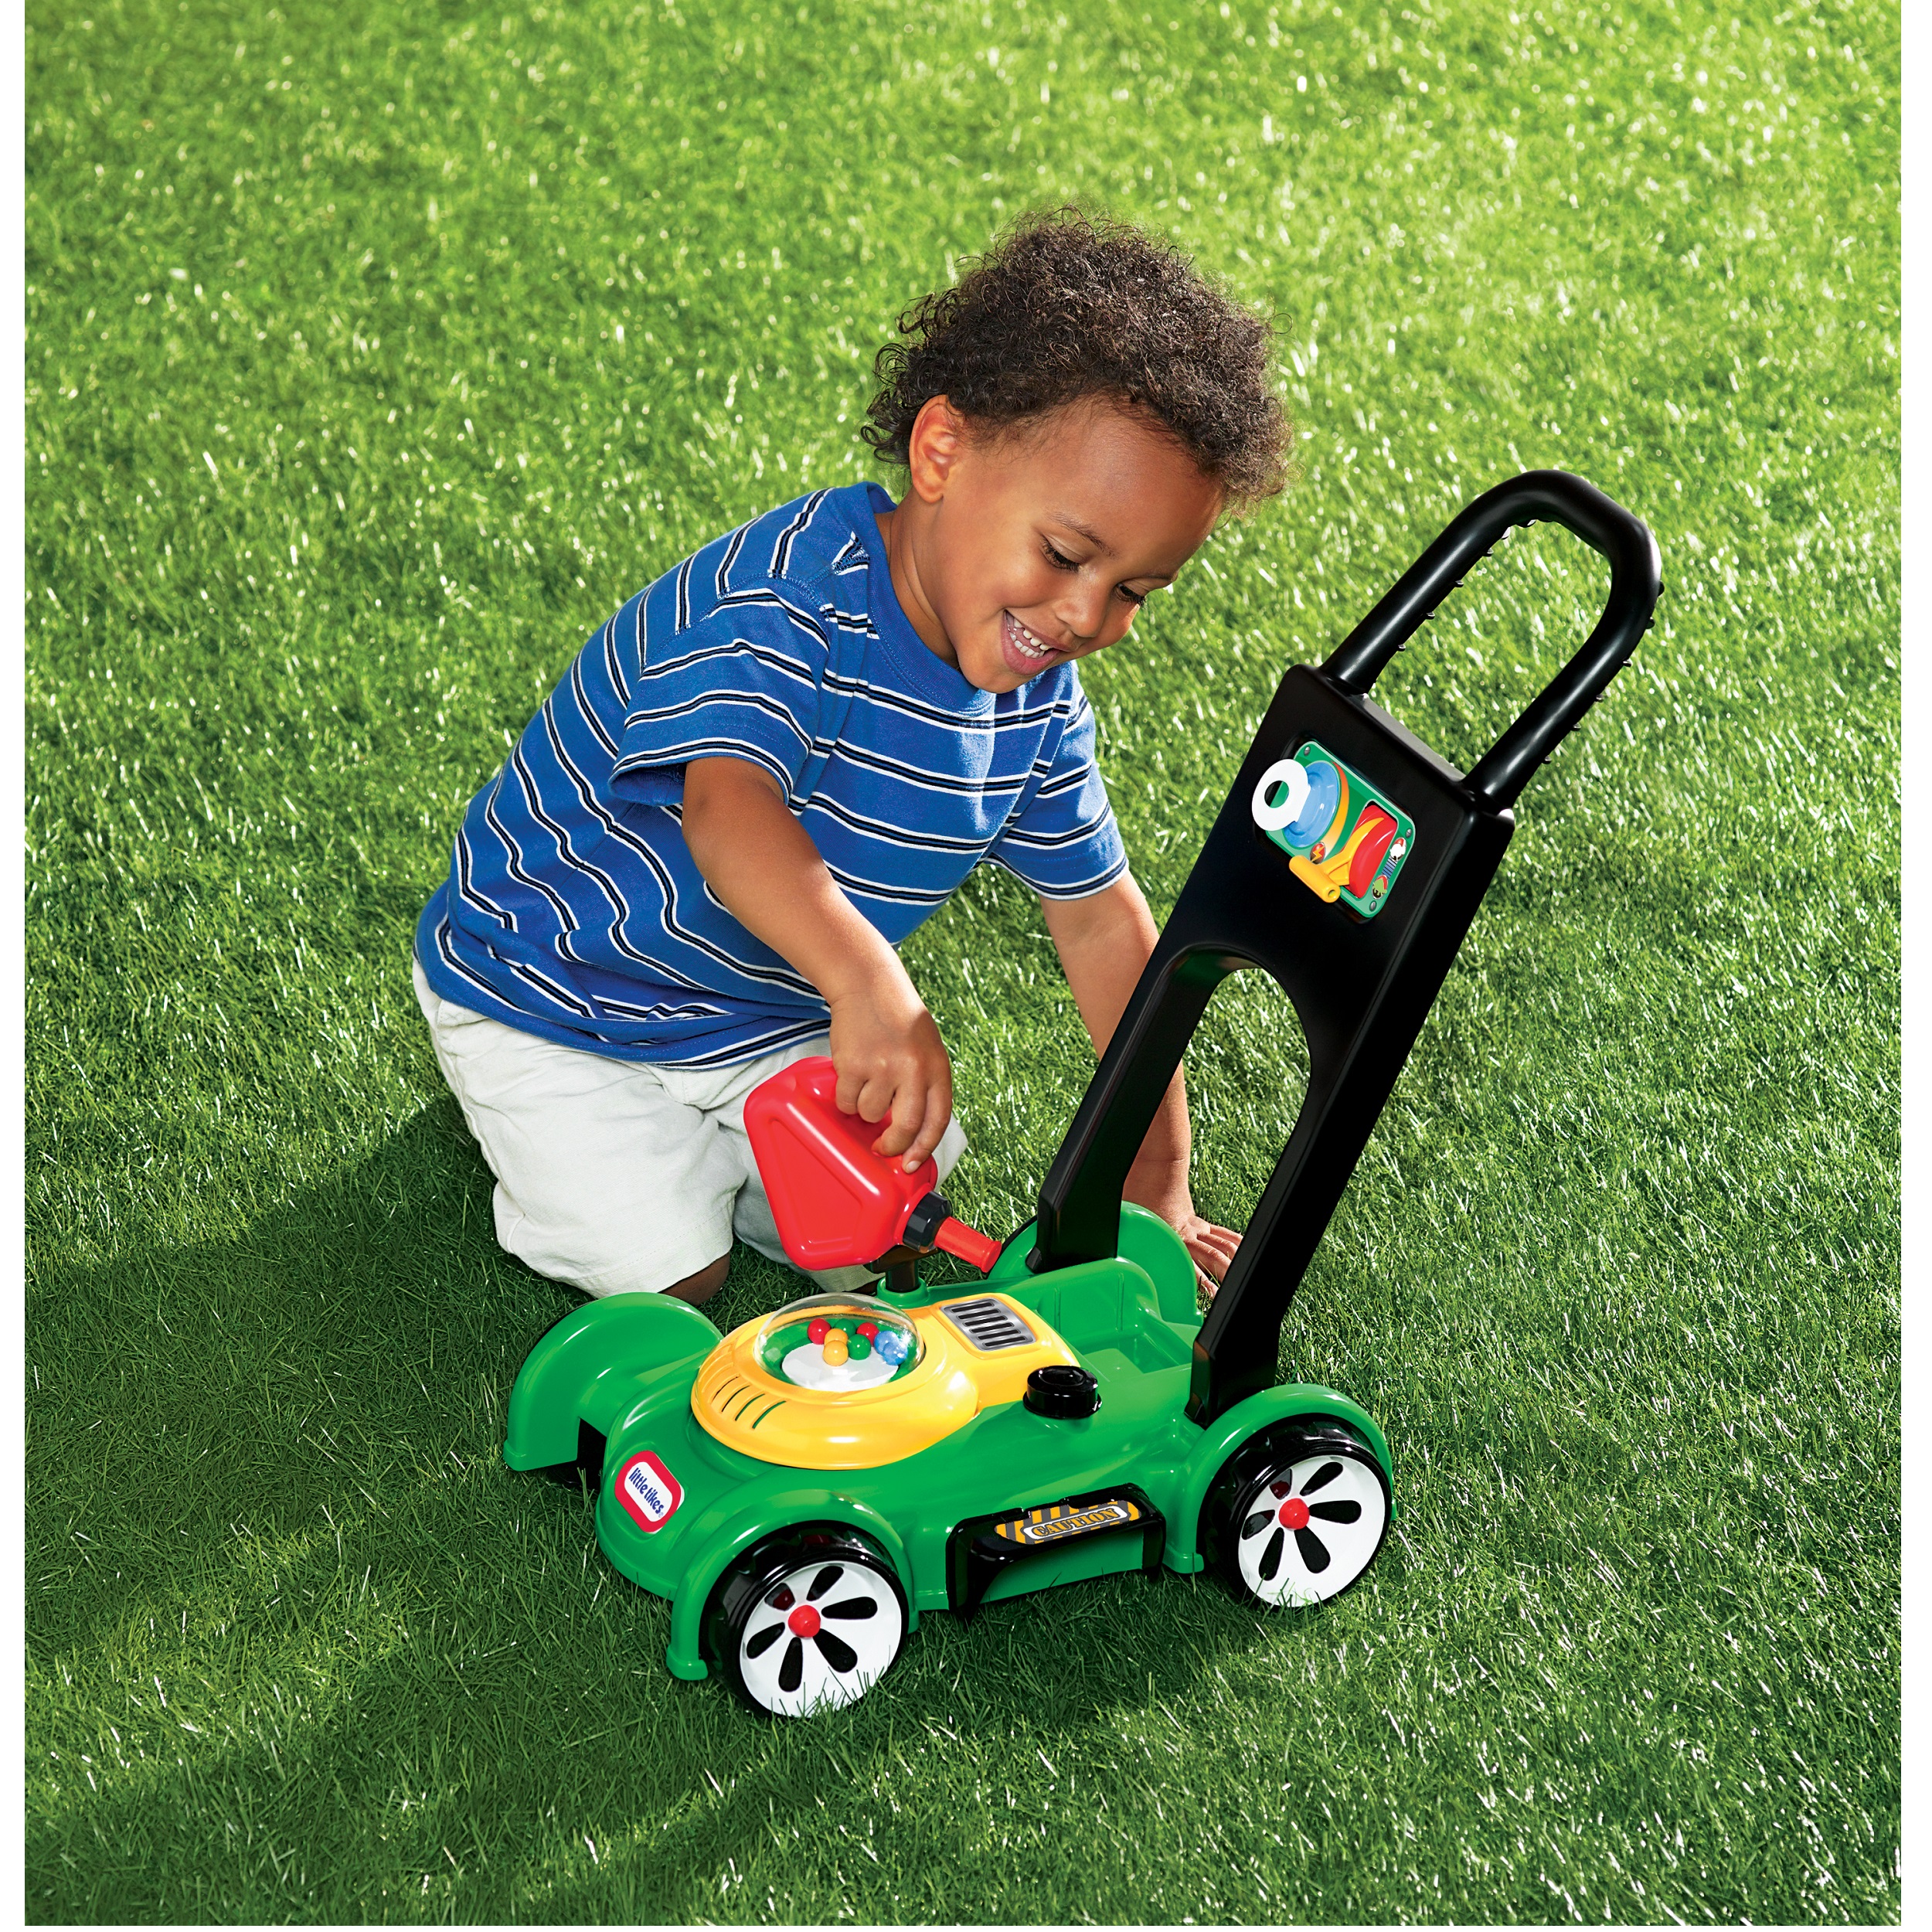 Little Tikes Gas N Go Mower Toddler Push Toy - For Kids Boys Girls Ages 1.5 Years and Older - image 5 of 7